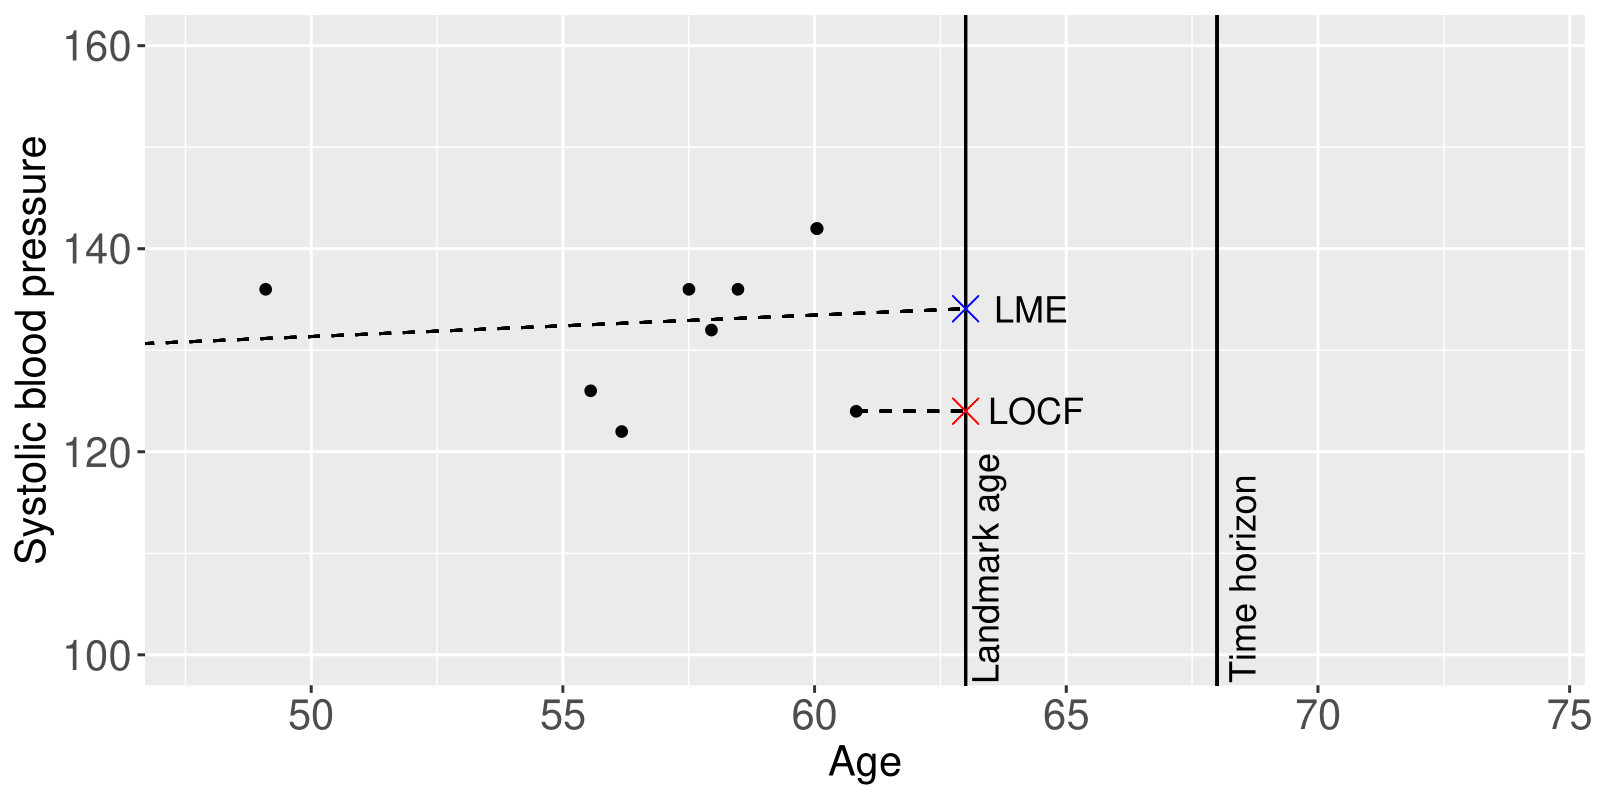 *Figure 2: Comparison of the LOCF and LME model to predict systolic blood pressure at a landmark age for an individual with 8 repeat measures.*